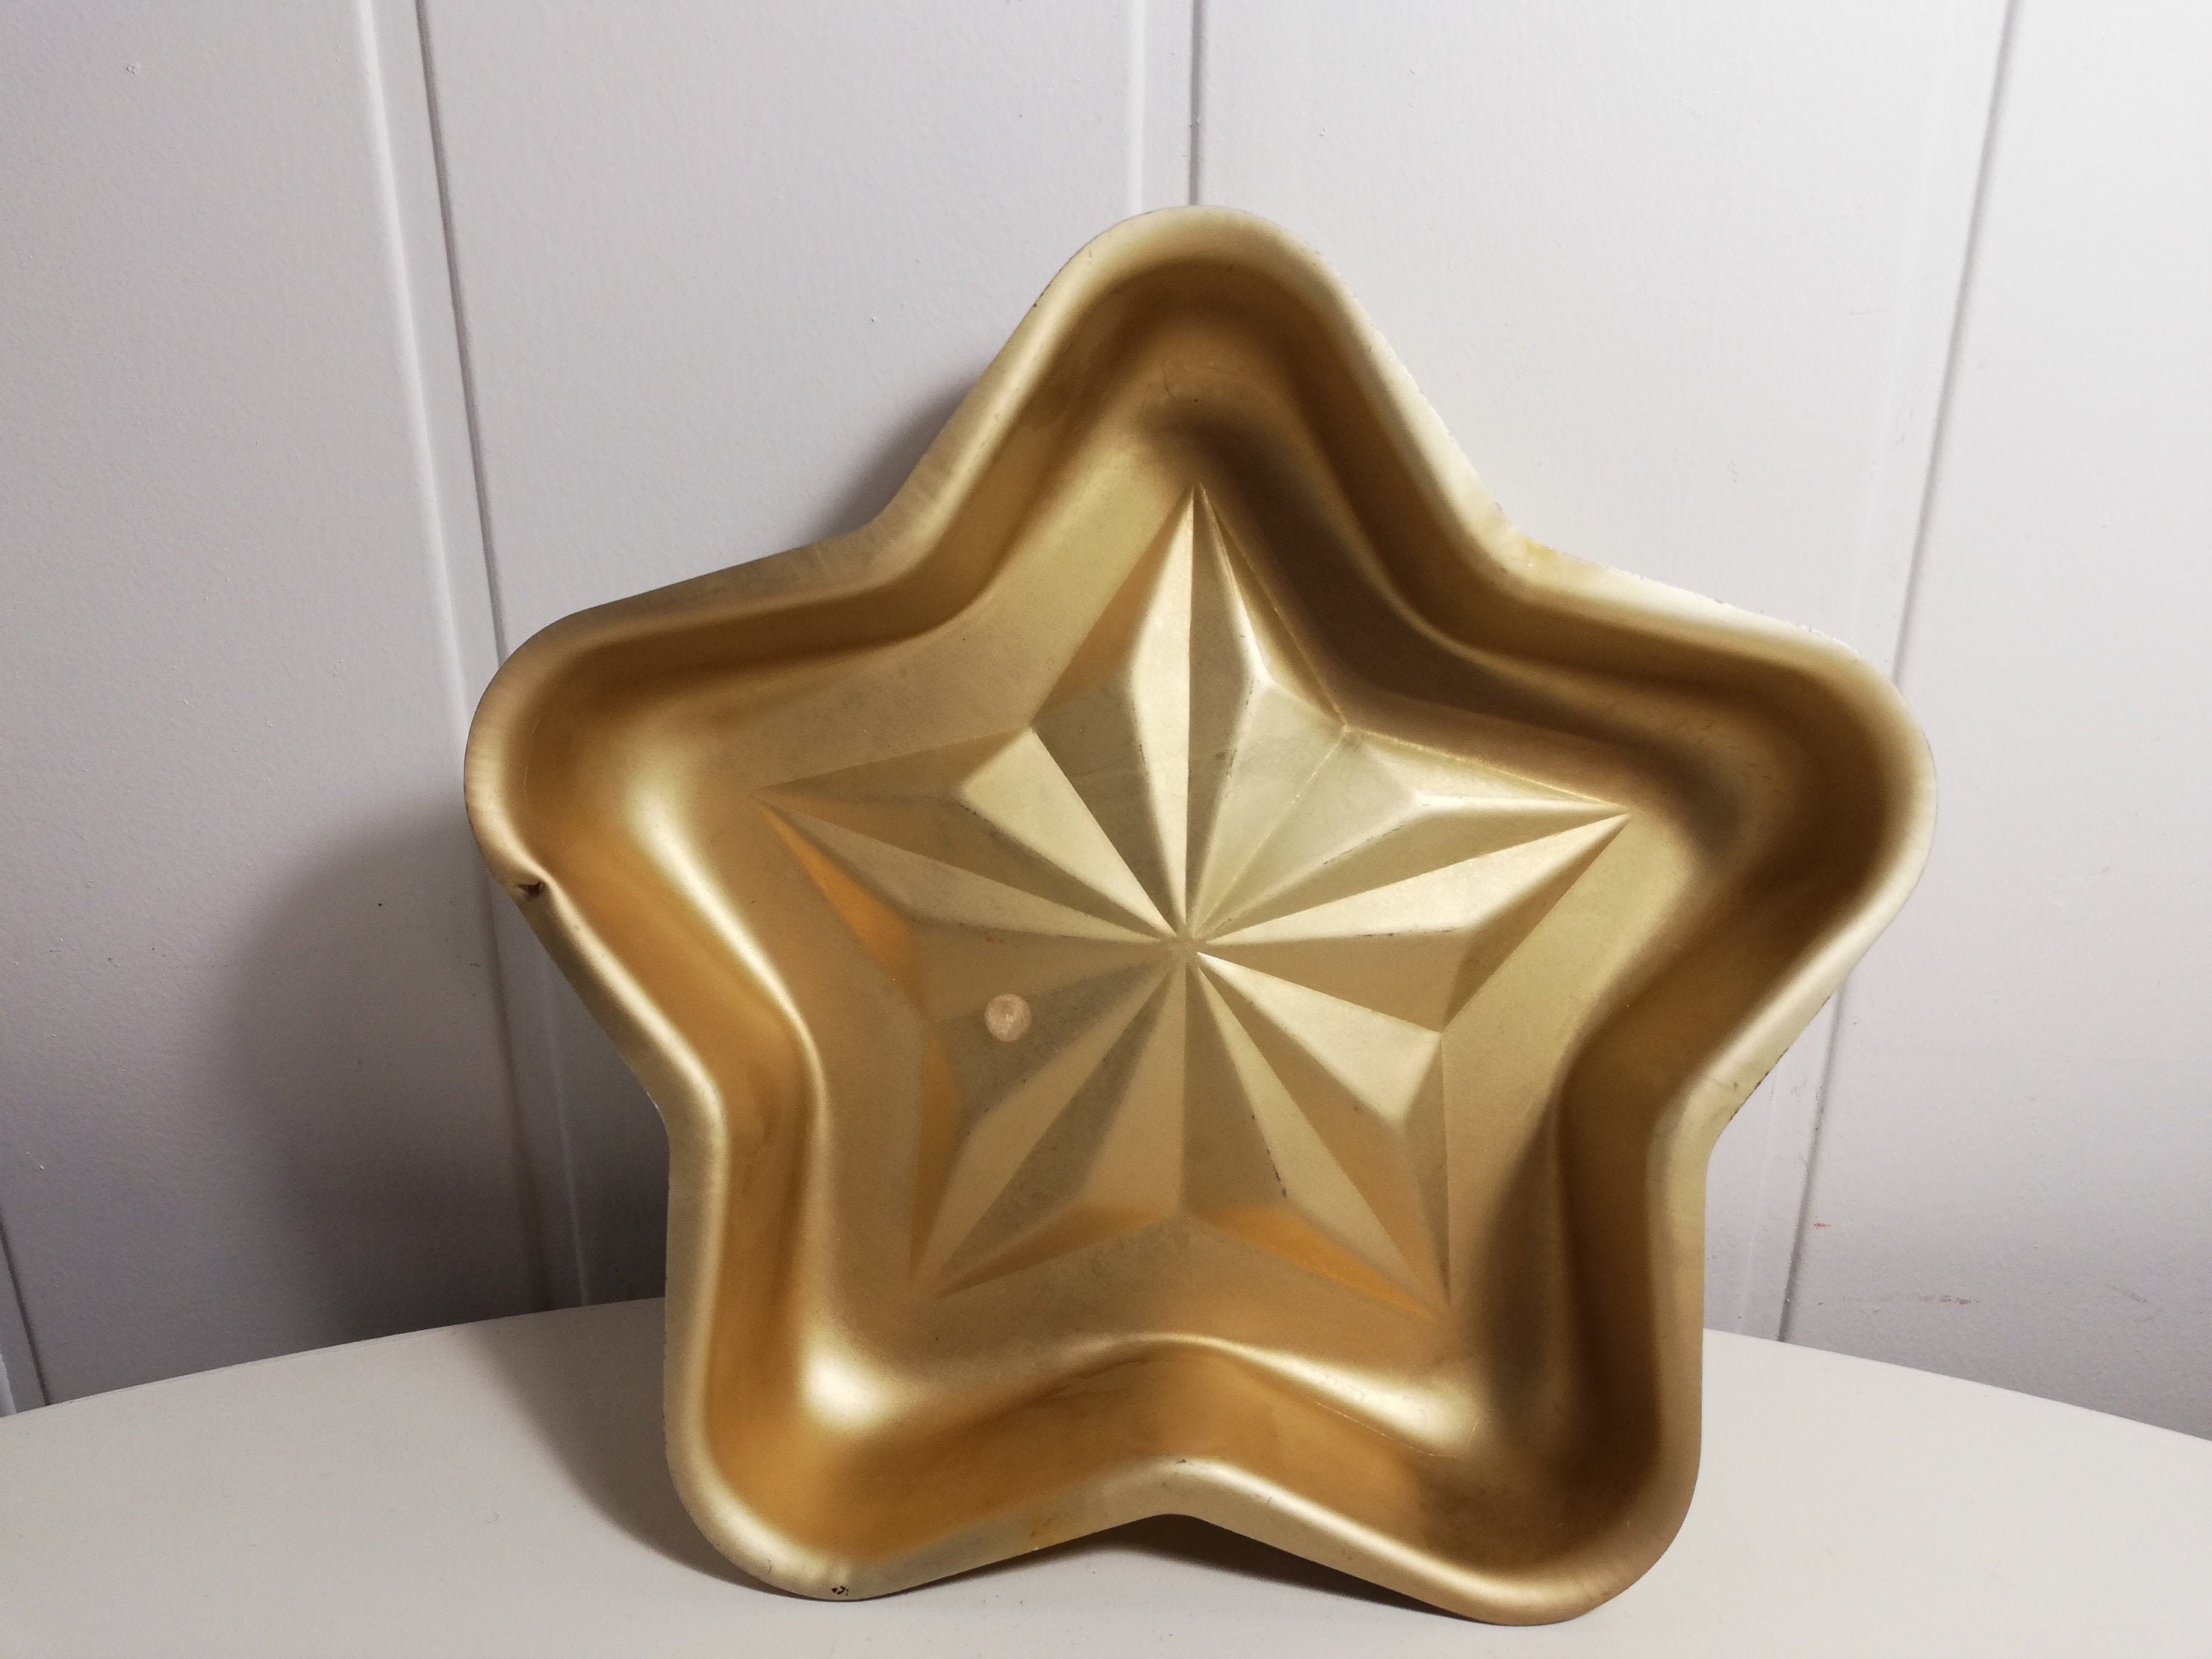 Luxshiny Non-Stick 4 Inch Star Shaped Cake Pan, Golden